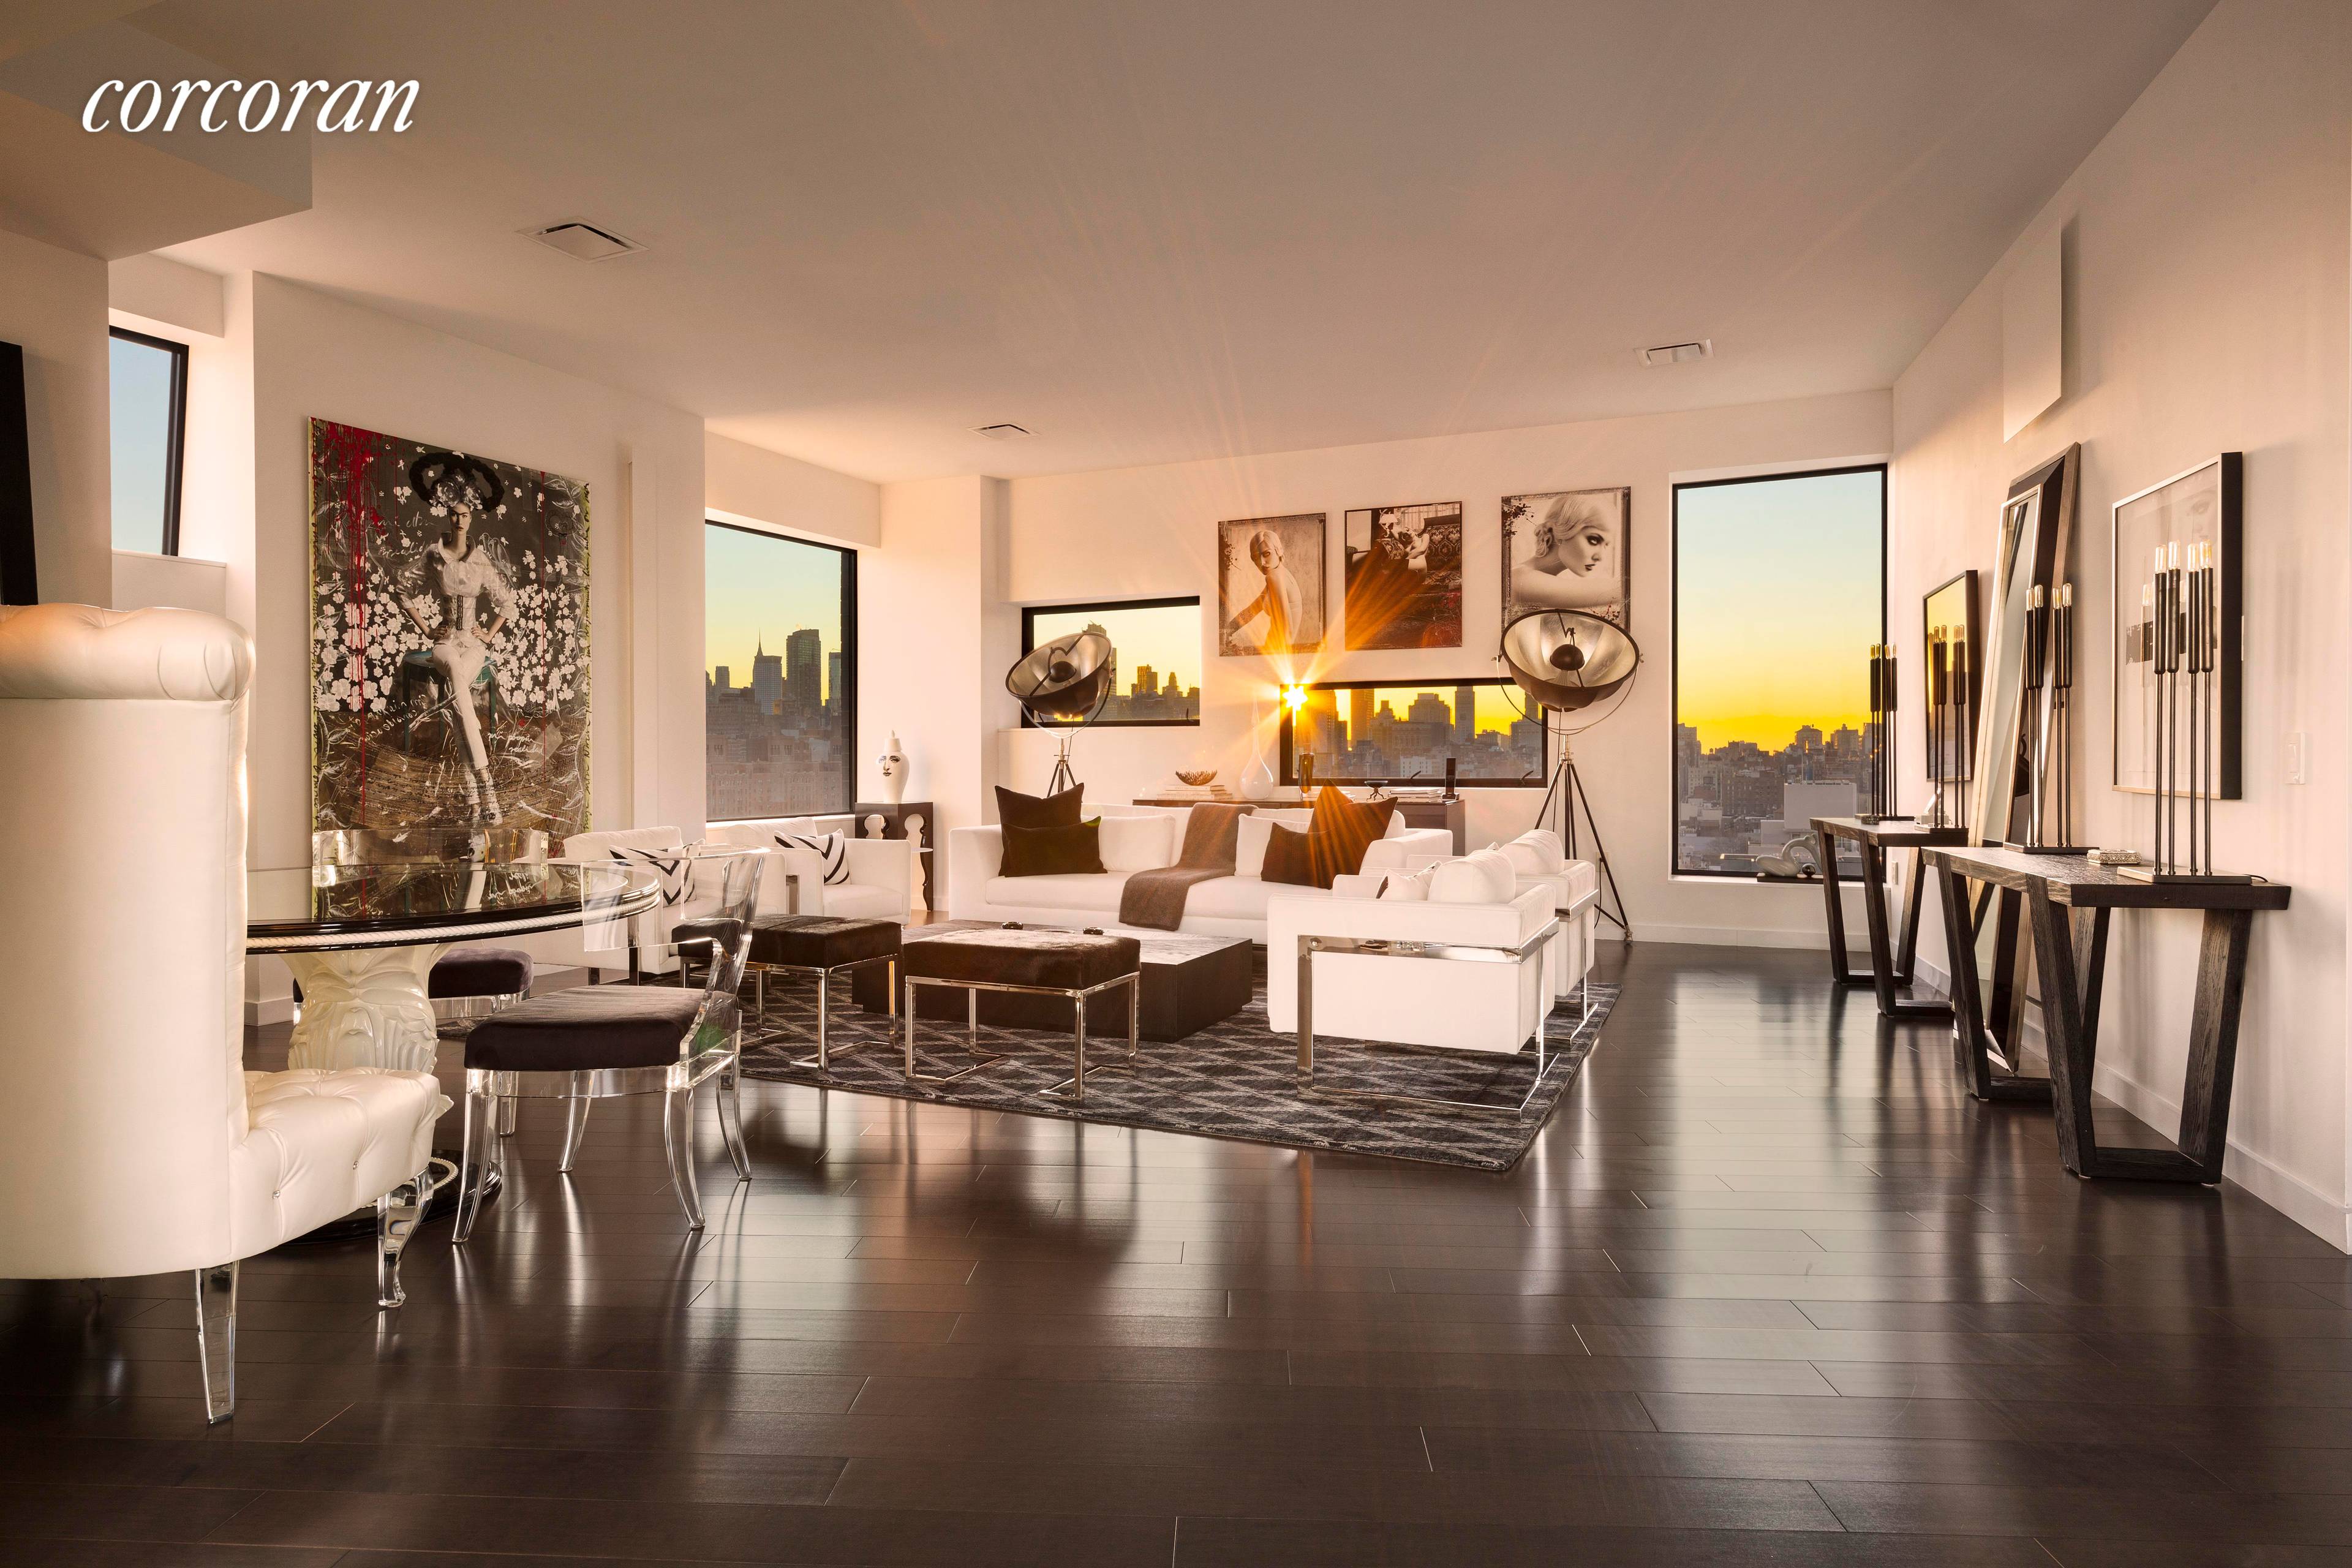 From the impeccable lobby at 100 11th Avenue, the elevator opens into your own 18th floor of this exquisite duplex.